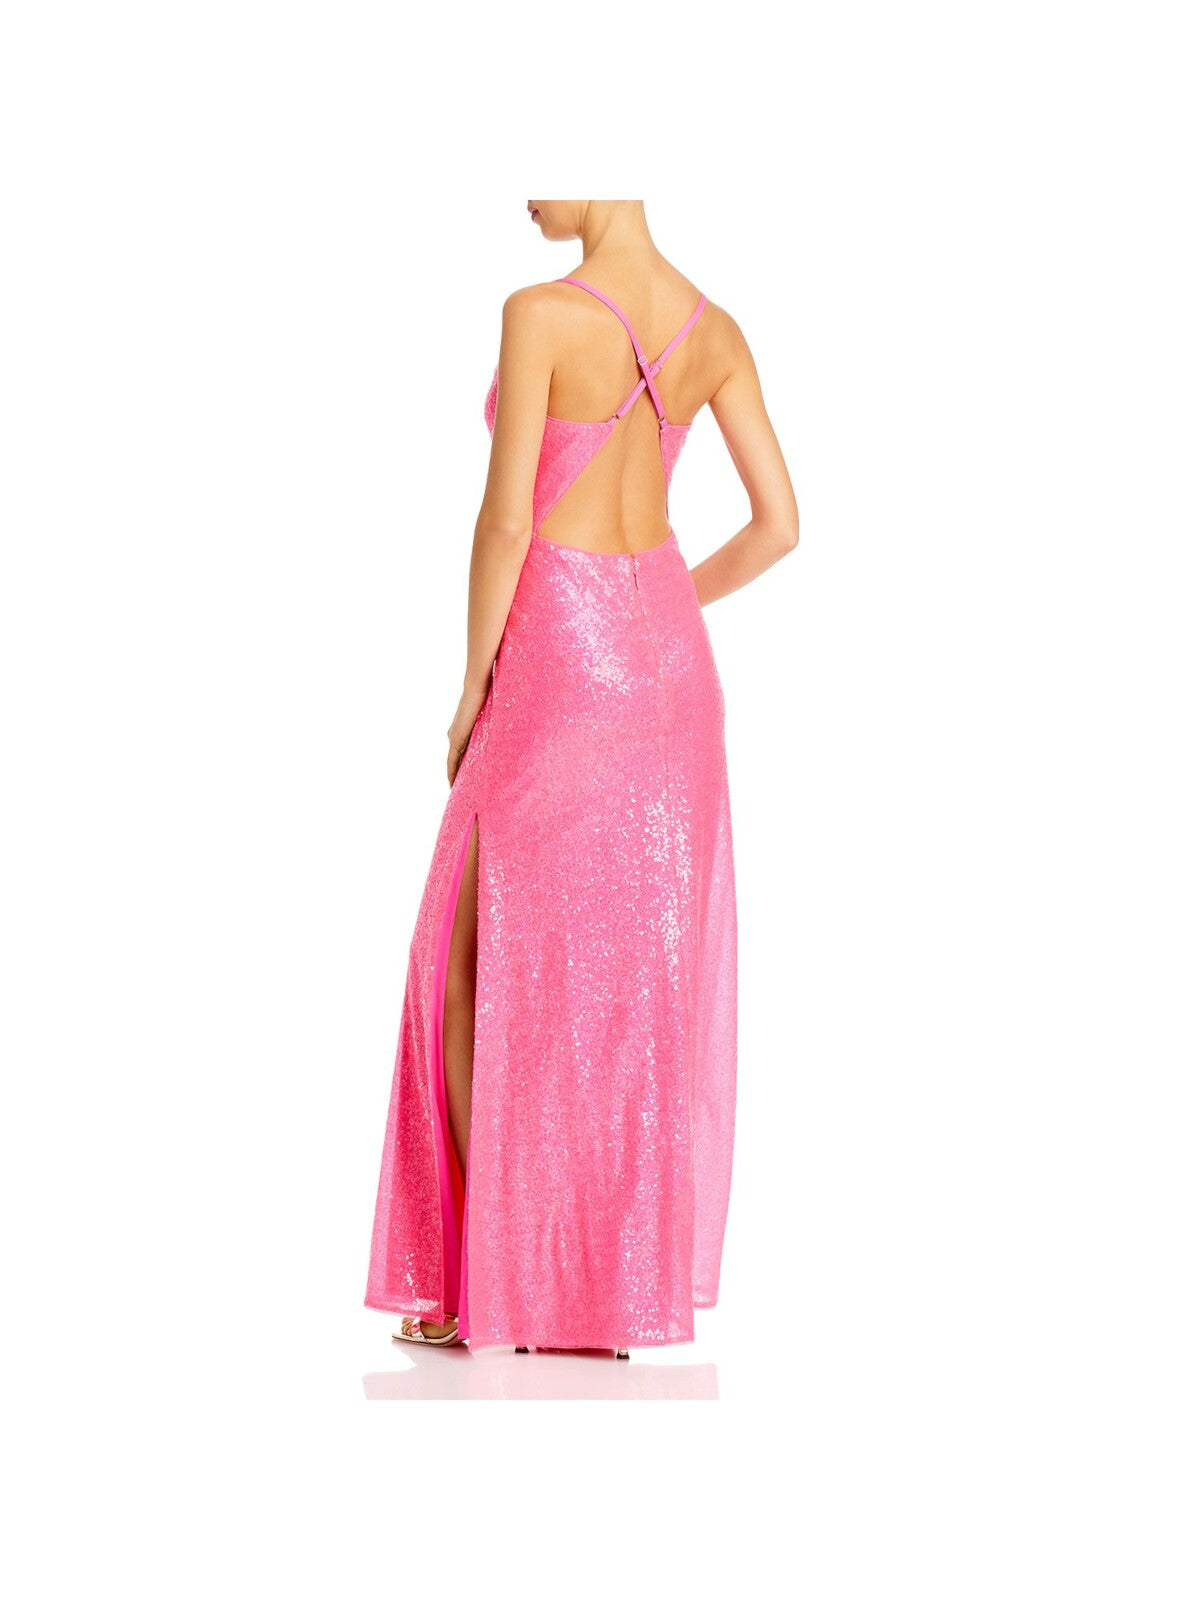 AQUA FORMAL Womens Pink Sequined Zippered Side Slit Lined Spaghetti Strap Cowl Neck Full-Length Prom Gown Dress XS